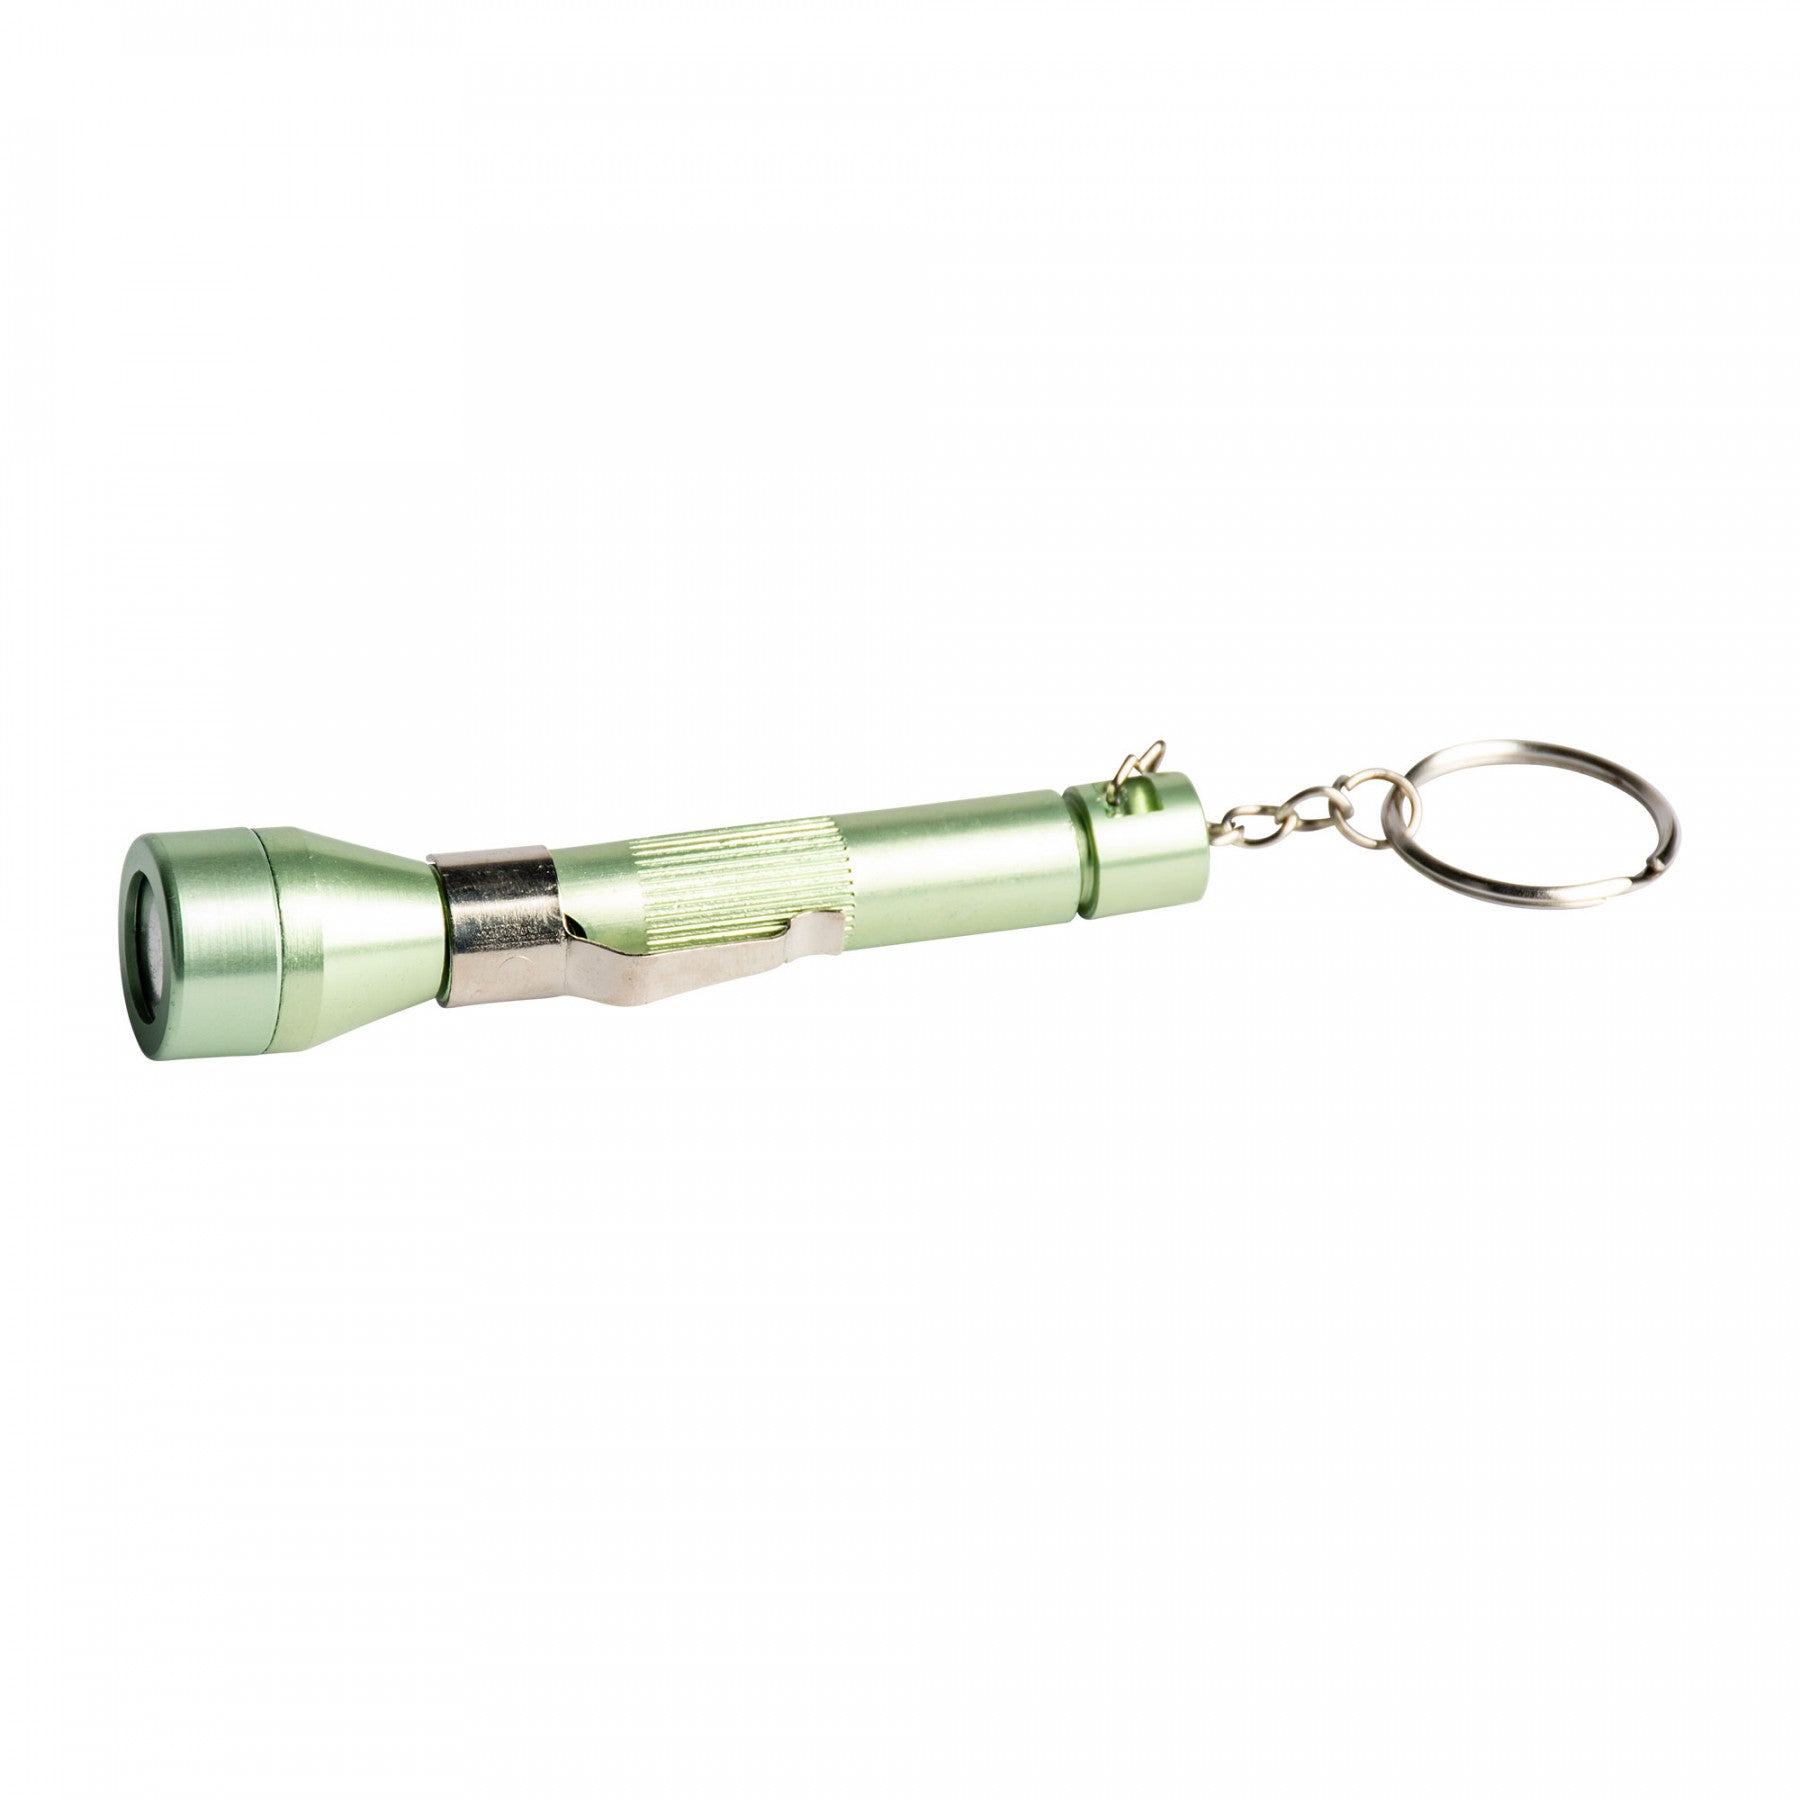 A small flashlight on a keychain that is also a metal pipe